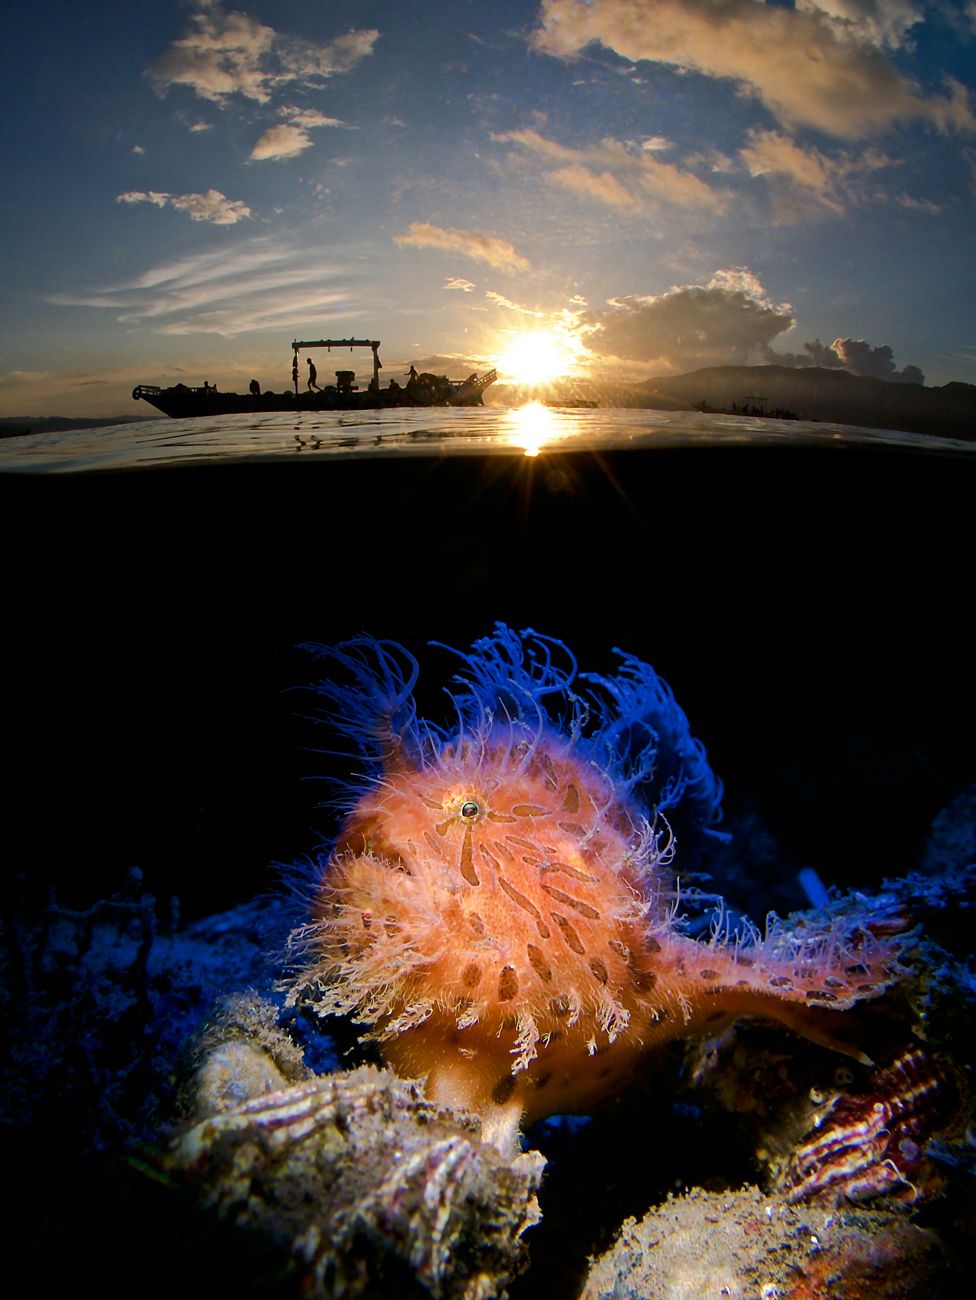 Fisherman at work and a Hairy Frogfish underwater